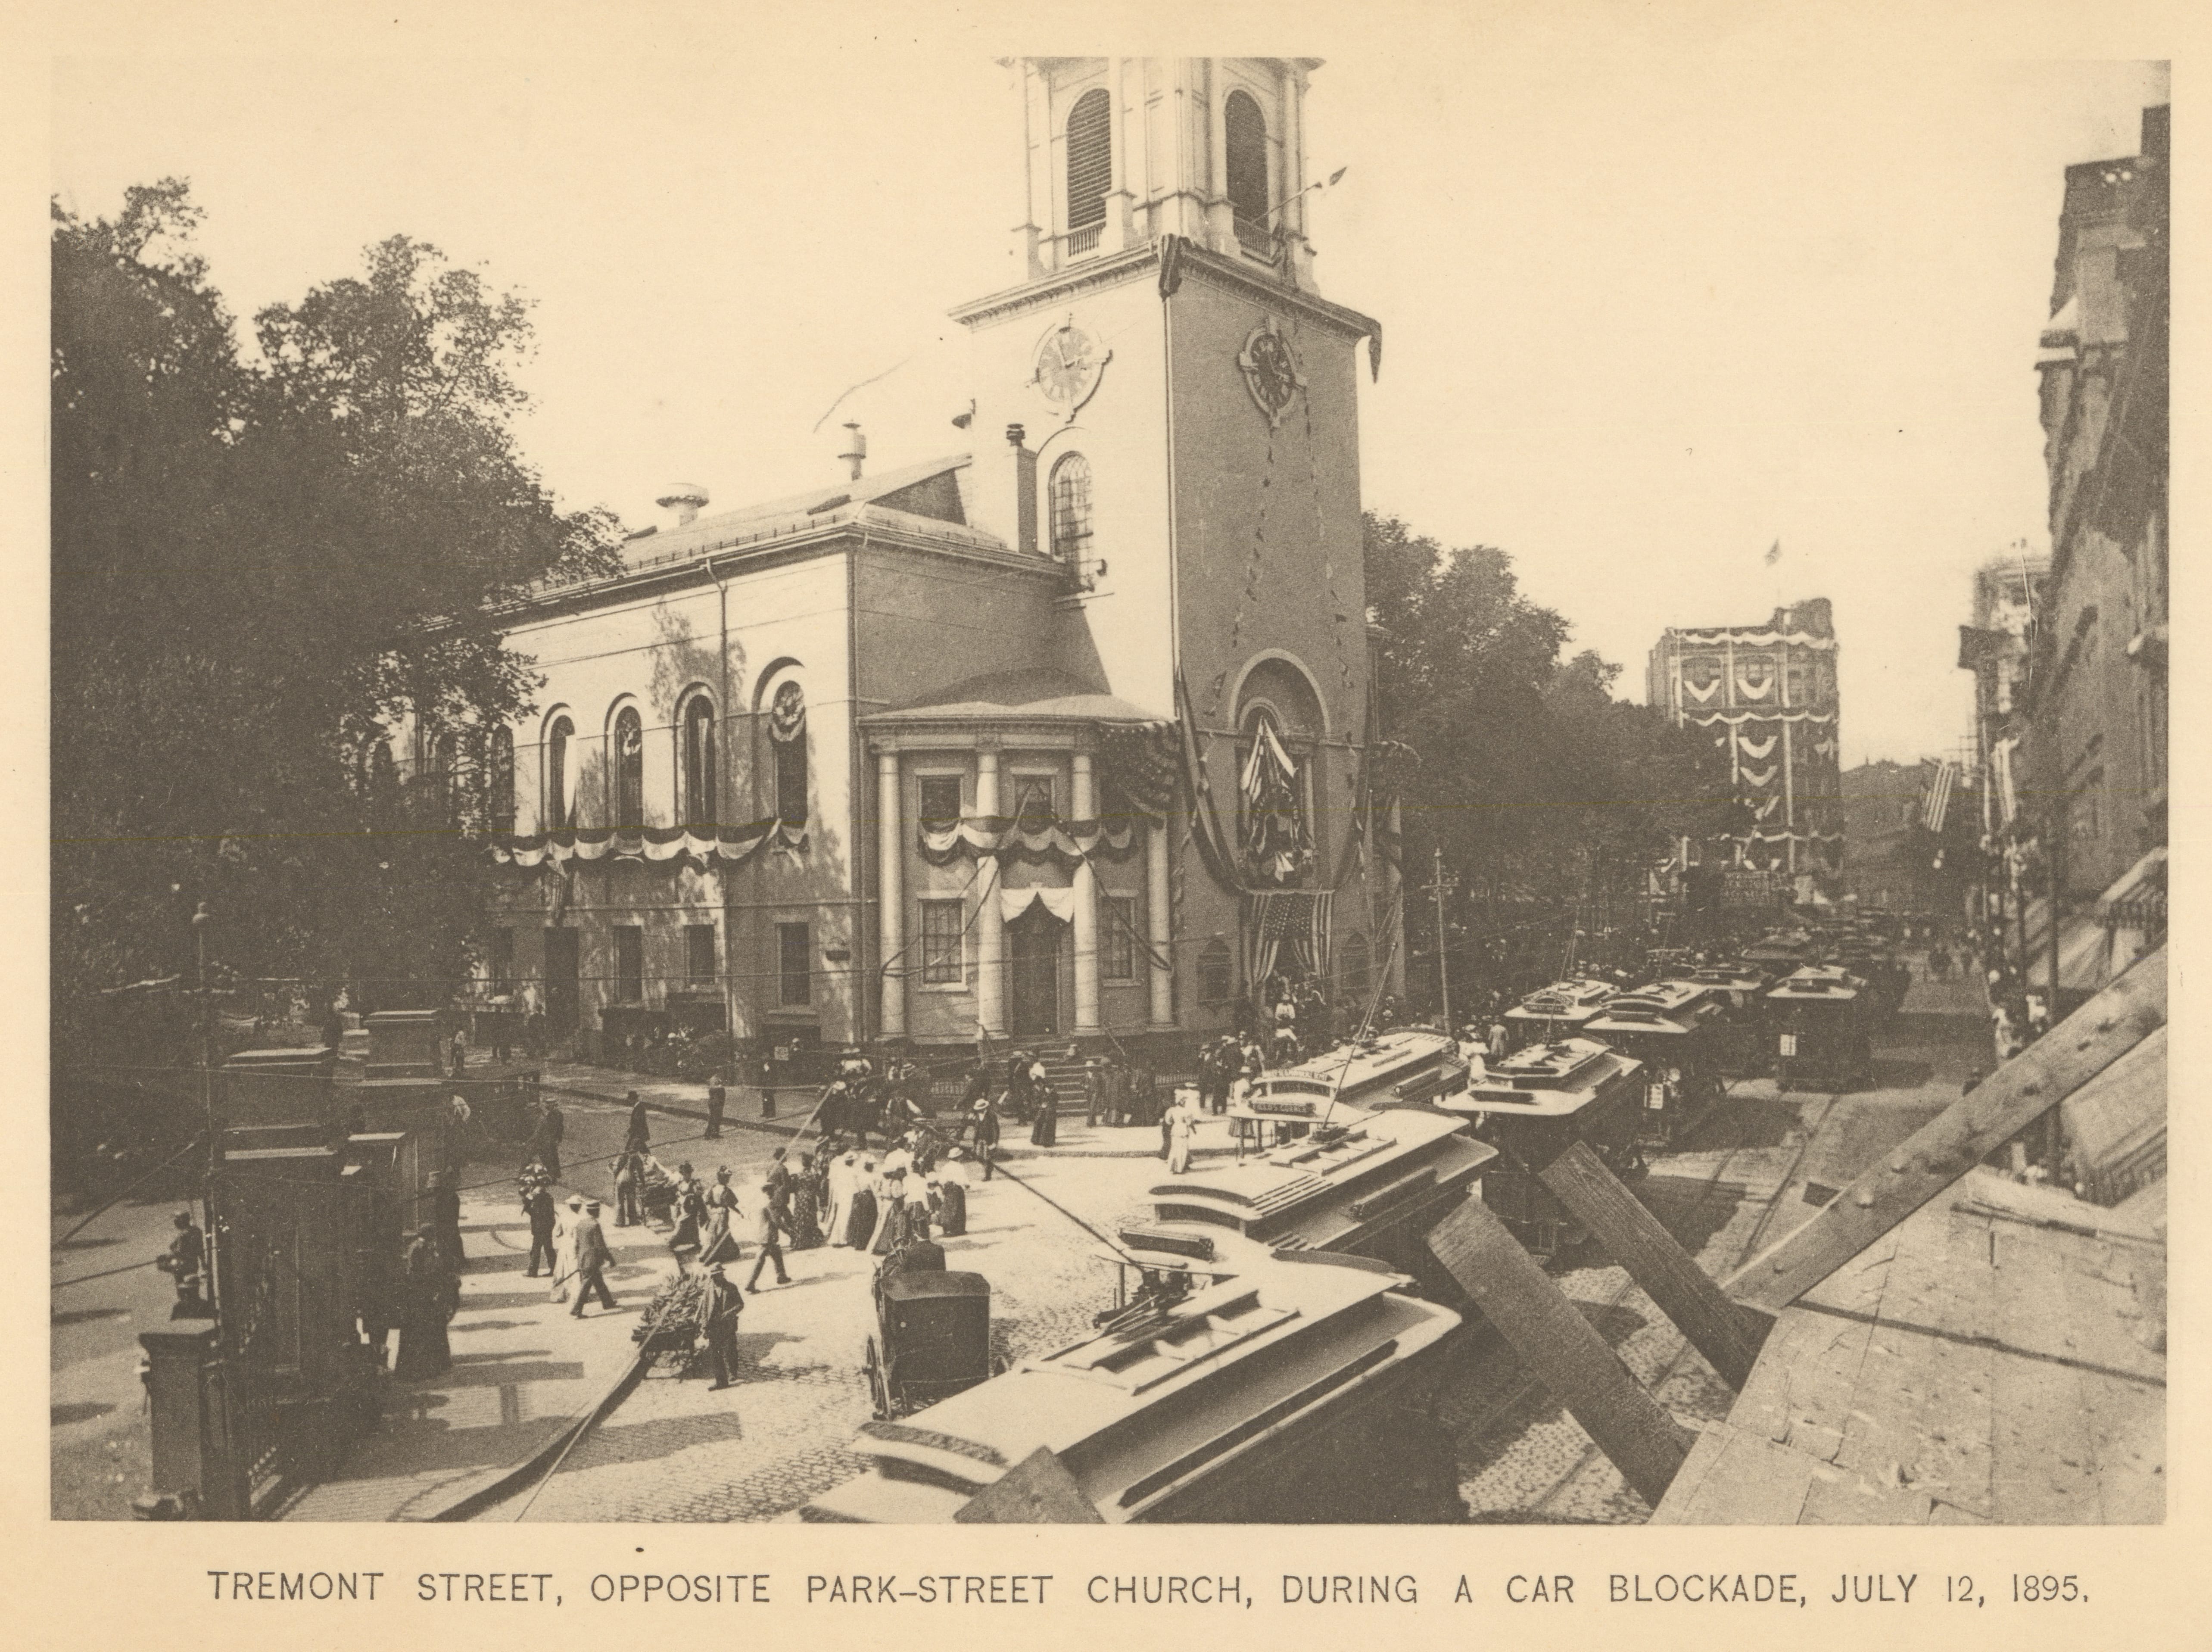 Image of “Tremont Street, Opposite Park-Street Church, During a Car Blockade, July 12, 1895” from “First Annual Report of the Boston Transit Commission”